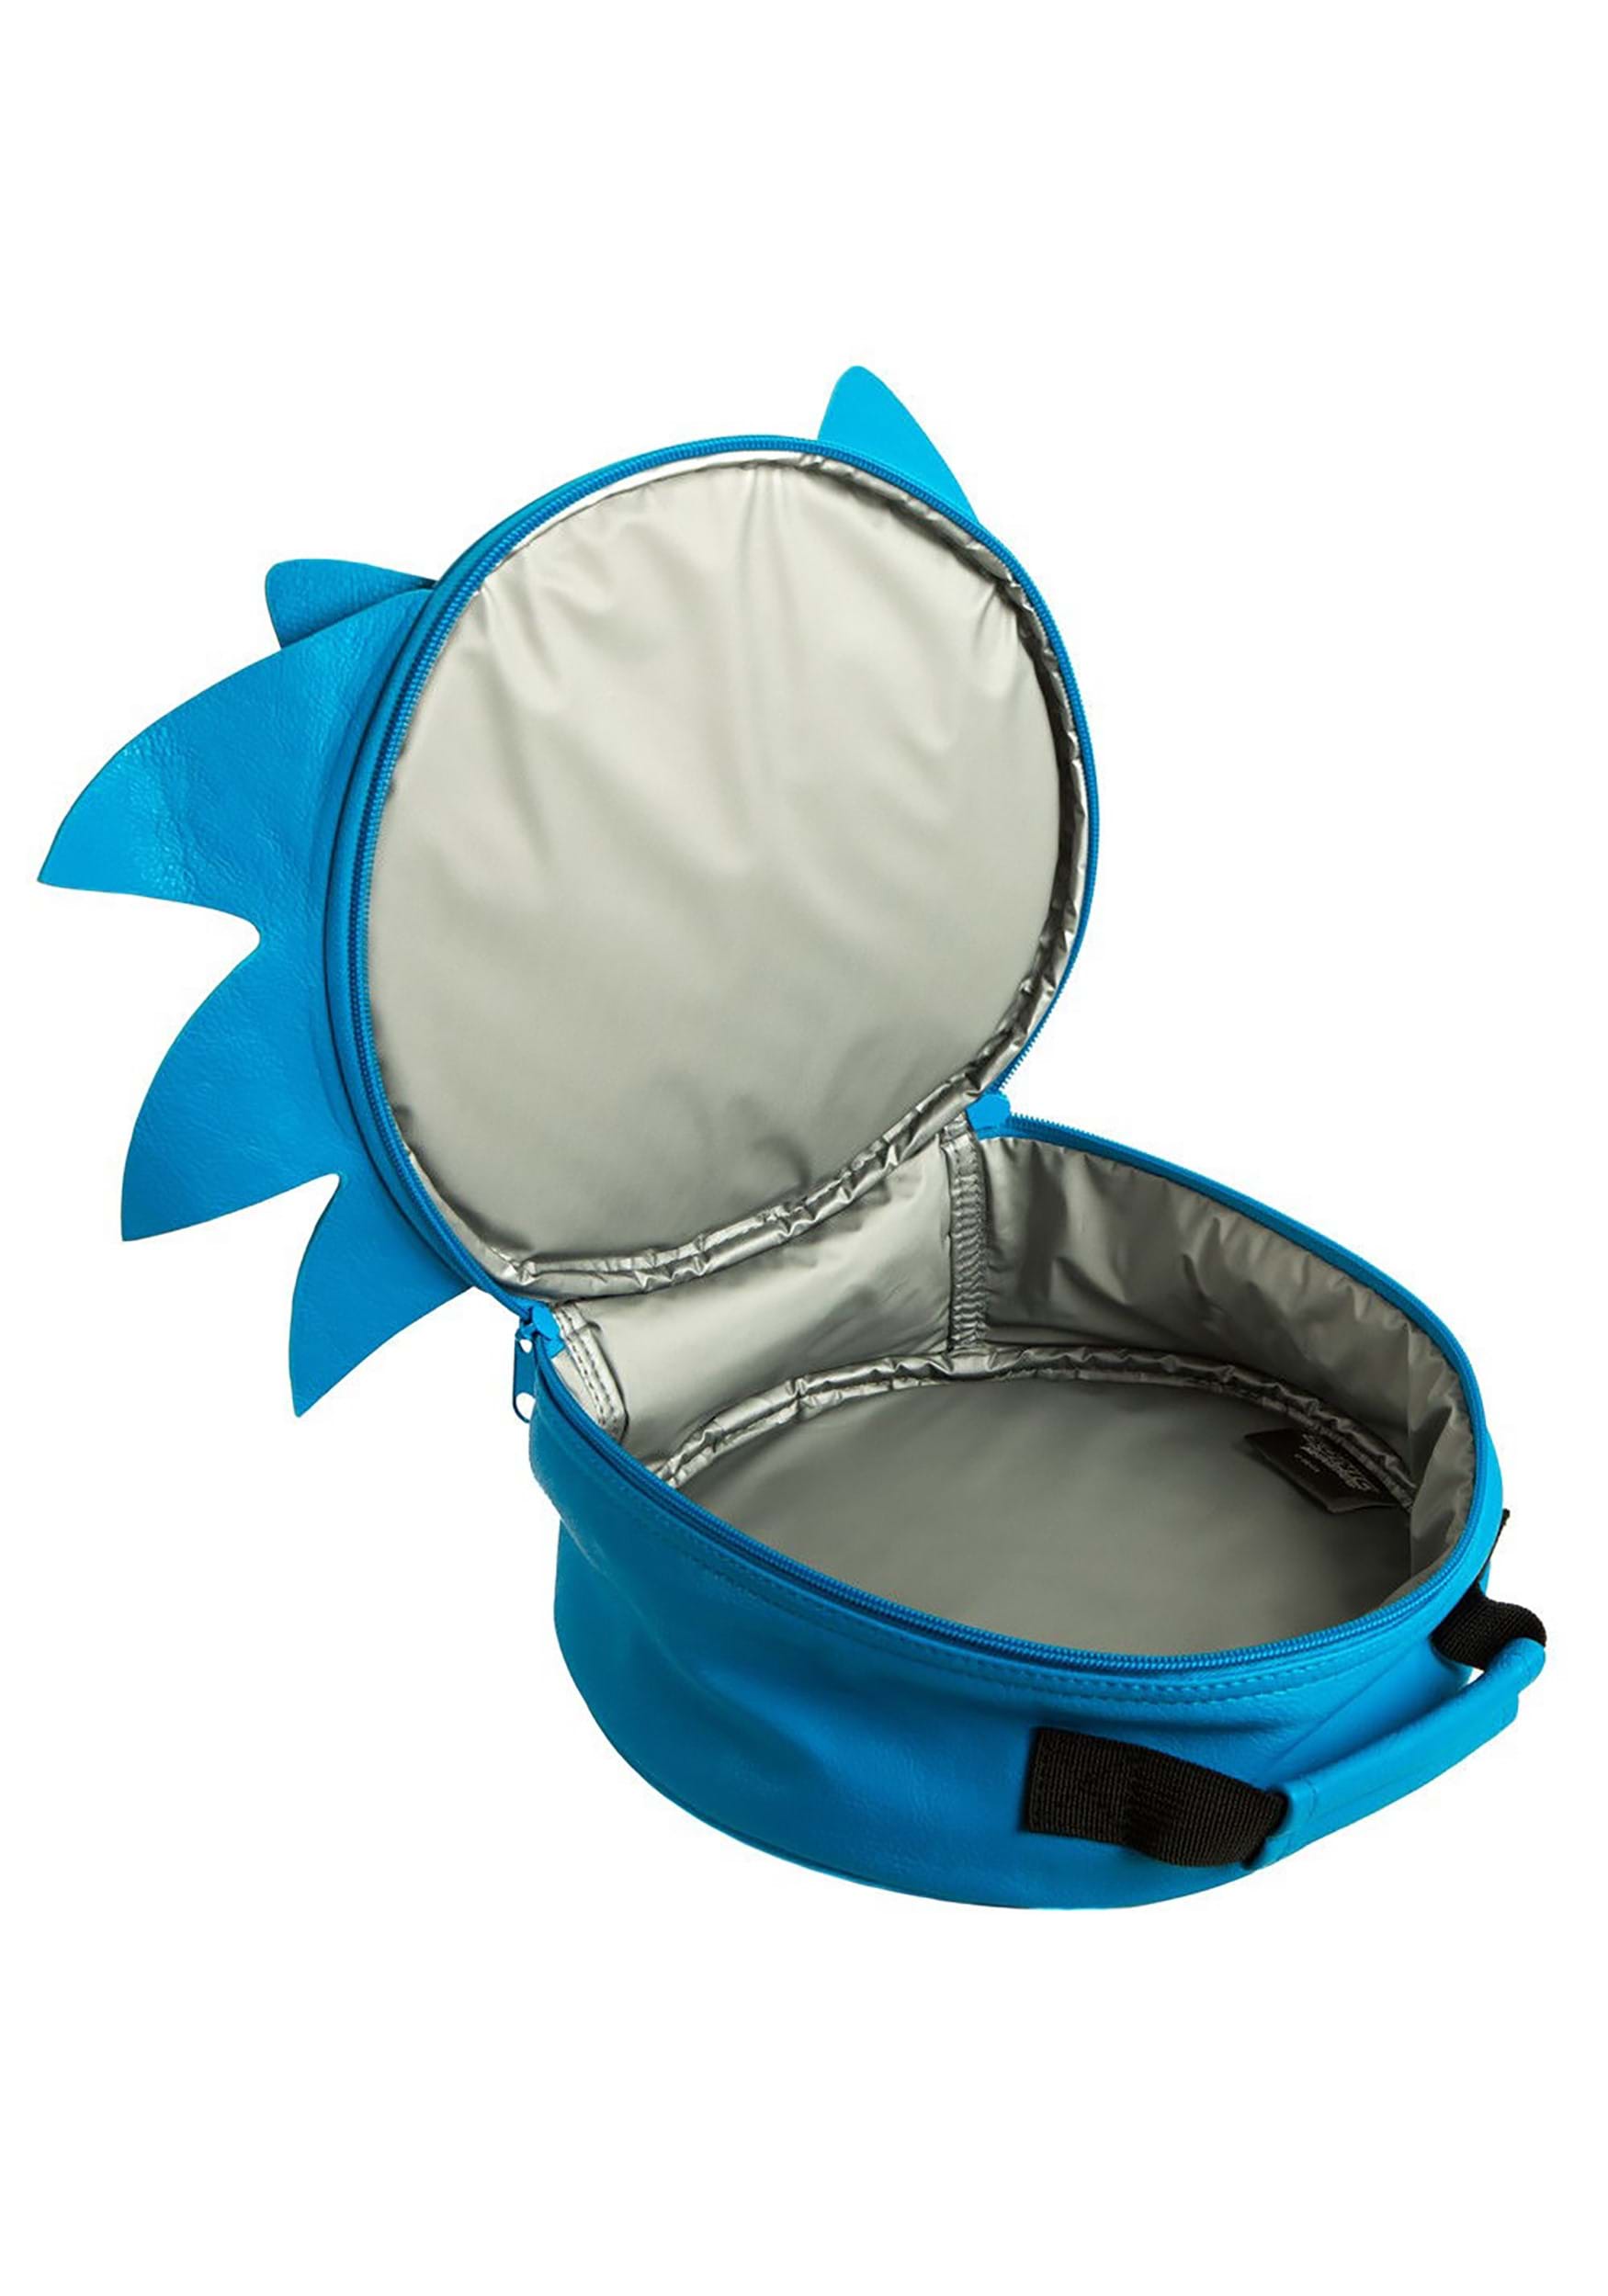 https://images.fun.com/products/77855/2-1-193653/sonic-the-hedgehog-insulated-lunch-box-alt-3.jpg